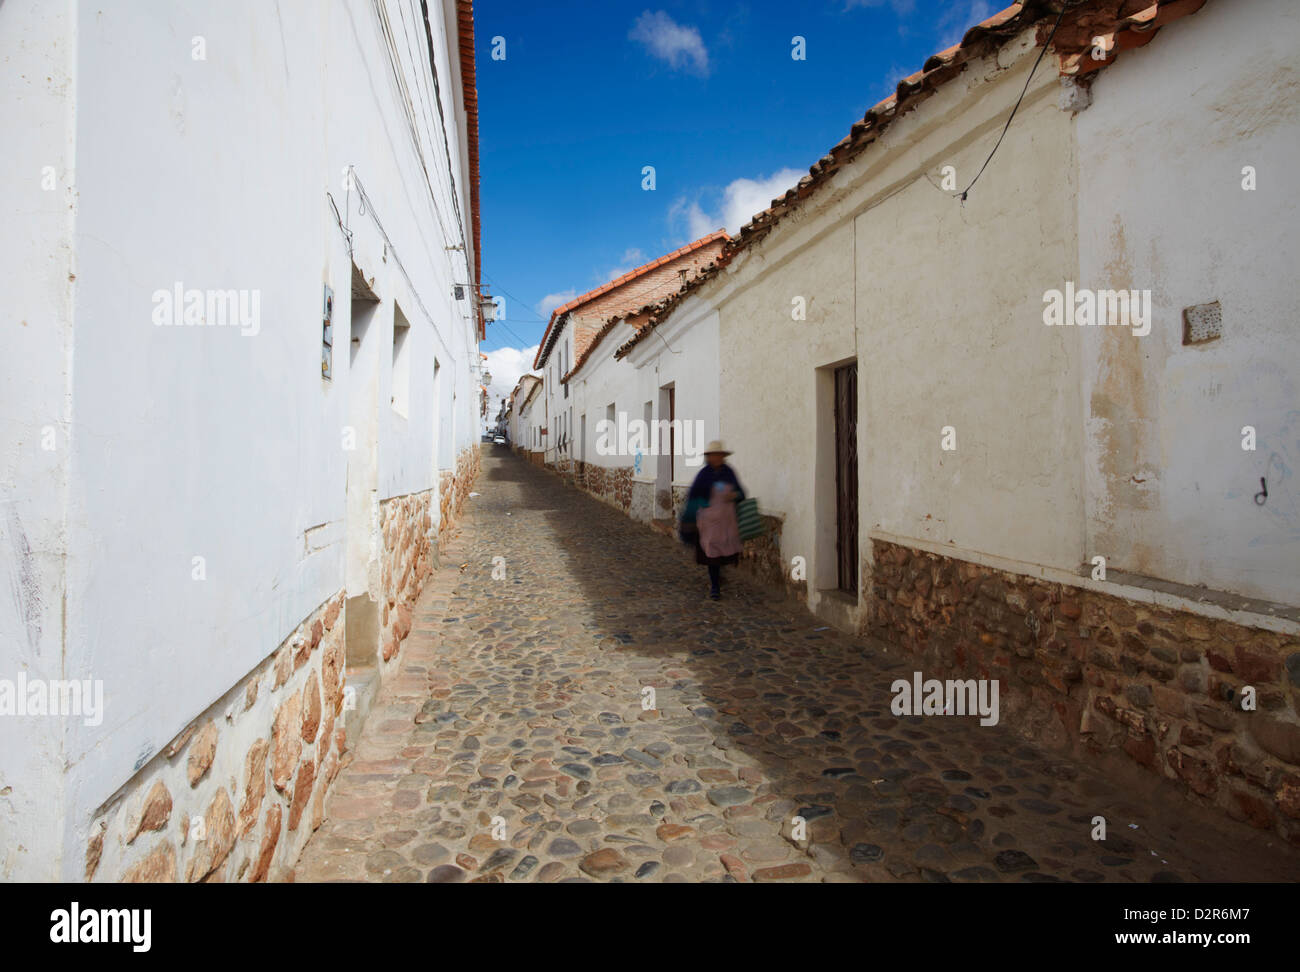 Woman walking along alleyway, Sucre, UNESCO World Heritage Site, Bolivia, South America Stock Photo